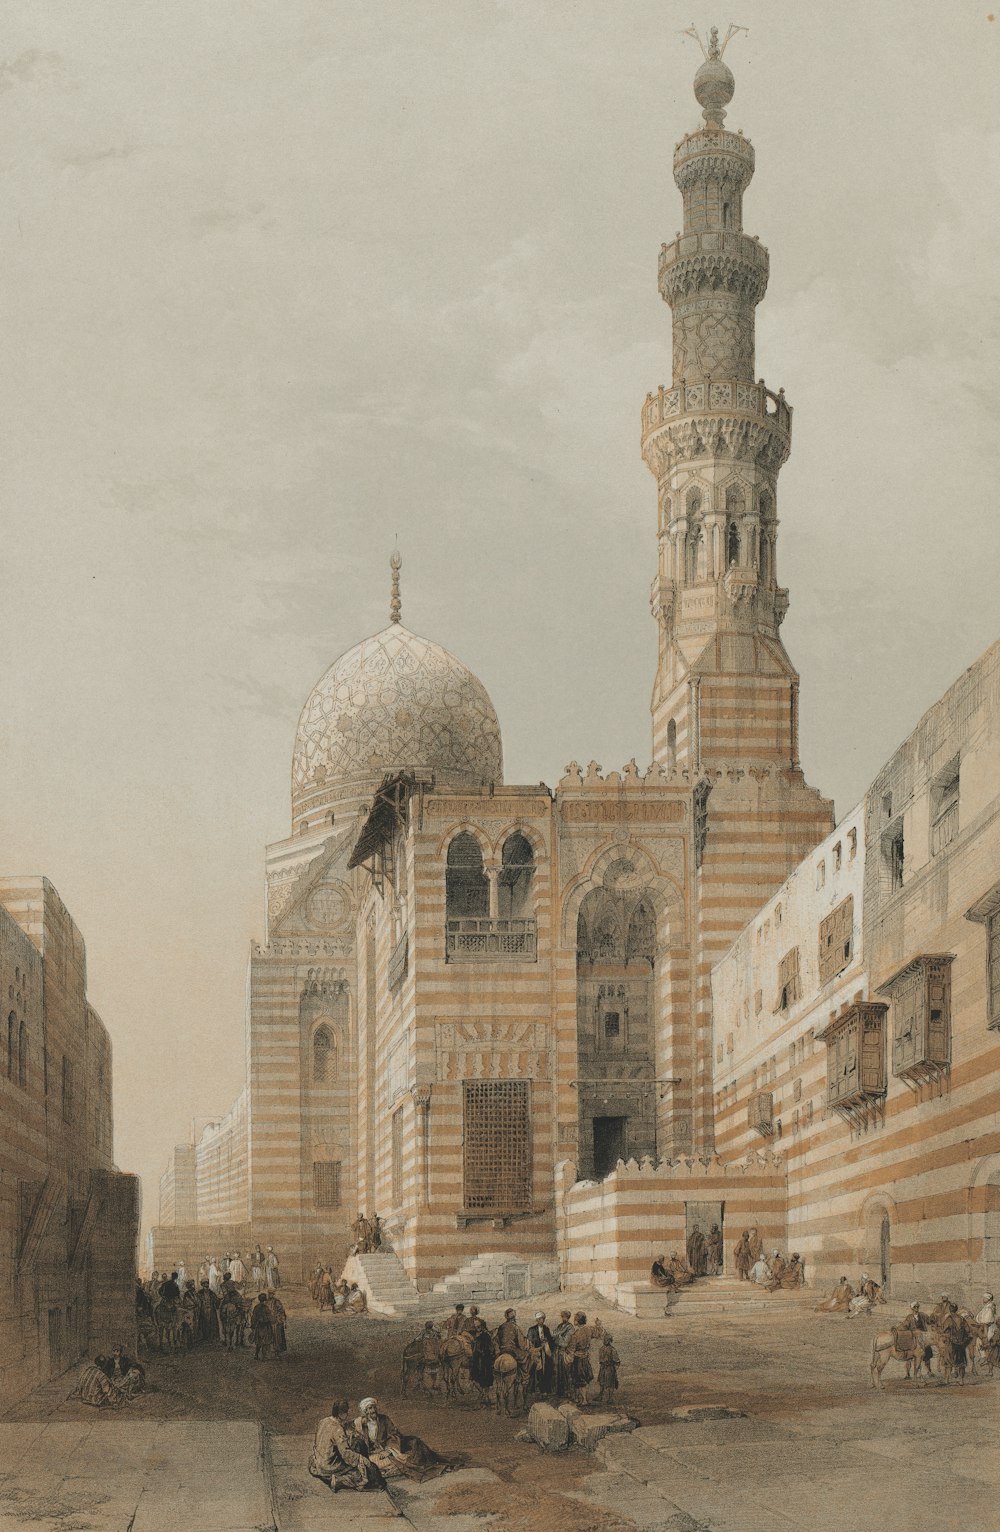 a painting of a large building with a tall tower